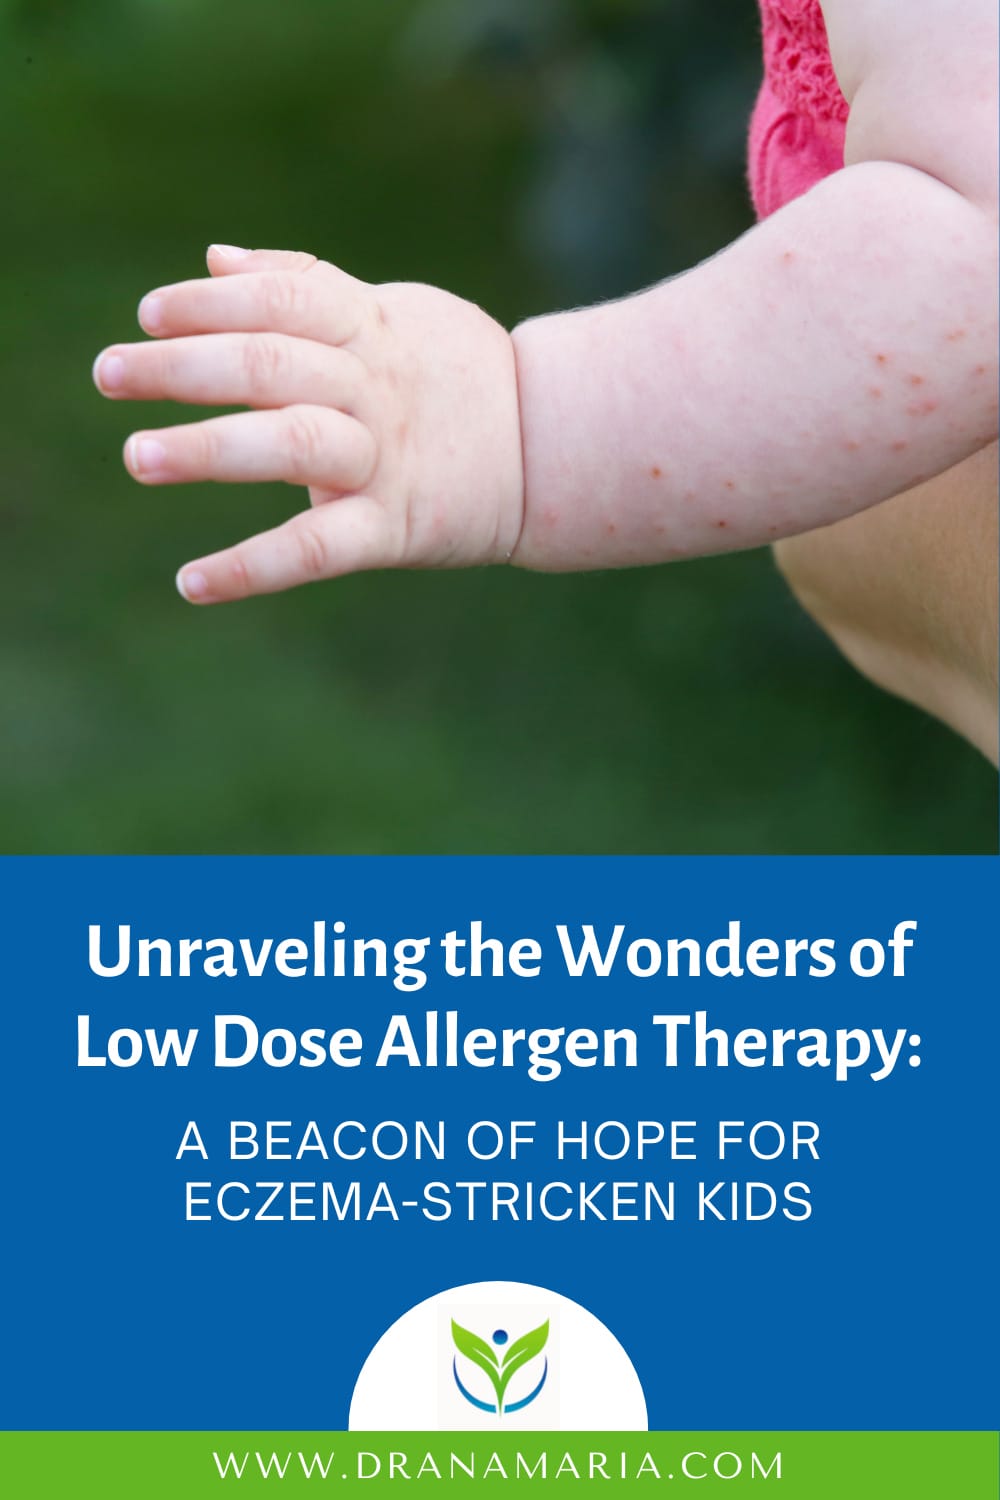 Unraveling The Wonders Of Low Dose Allergen Therapy Eczema Children And Kids